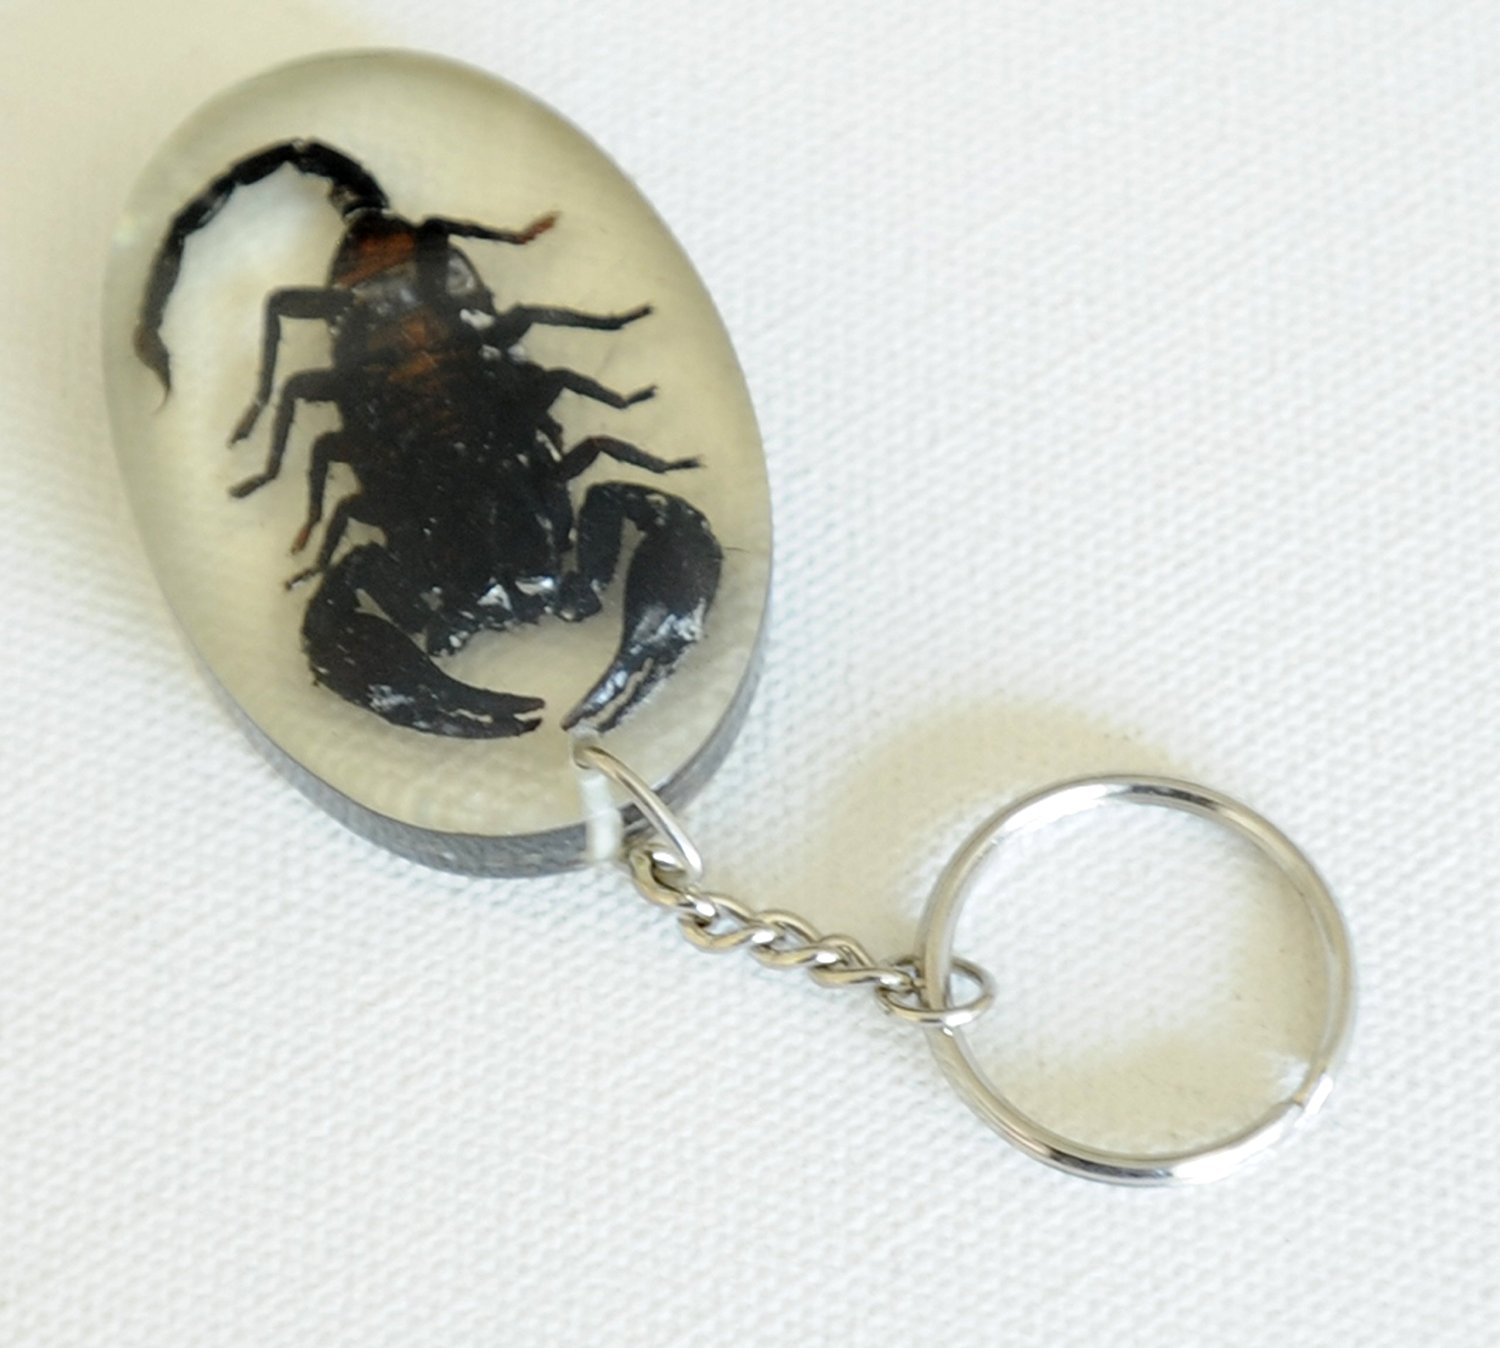 scorpion Key Ring, real small scorpion in acrylic - Insect Keychain ...